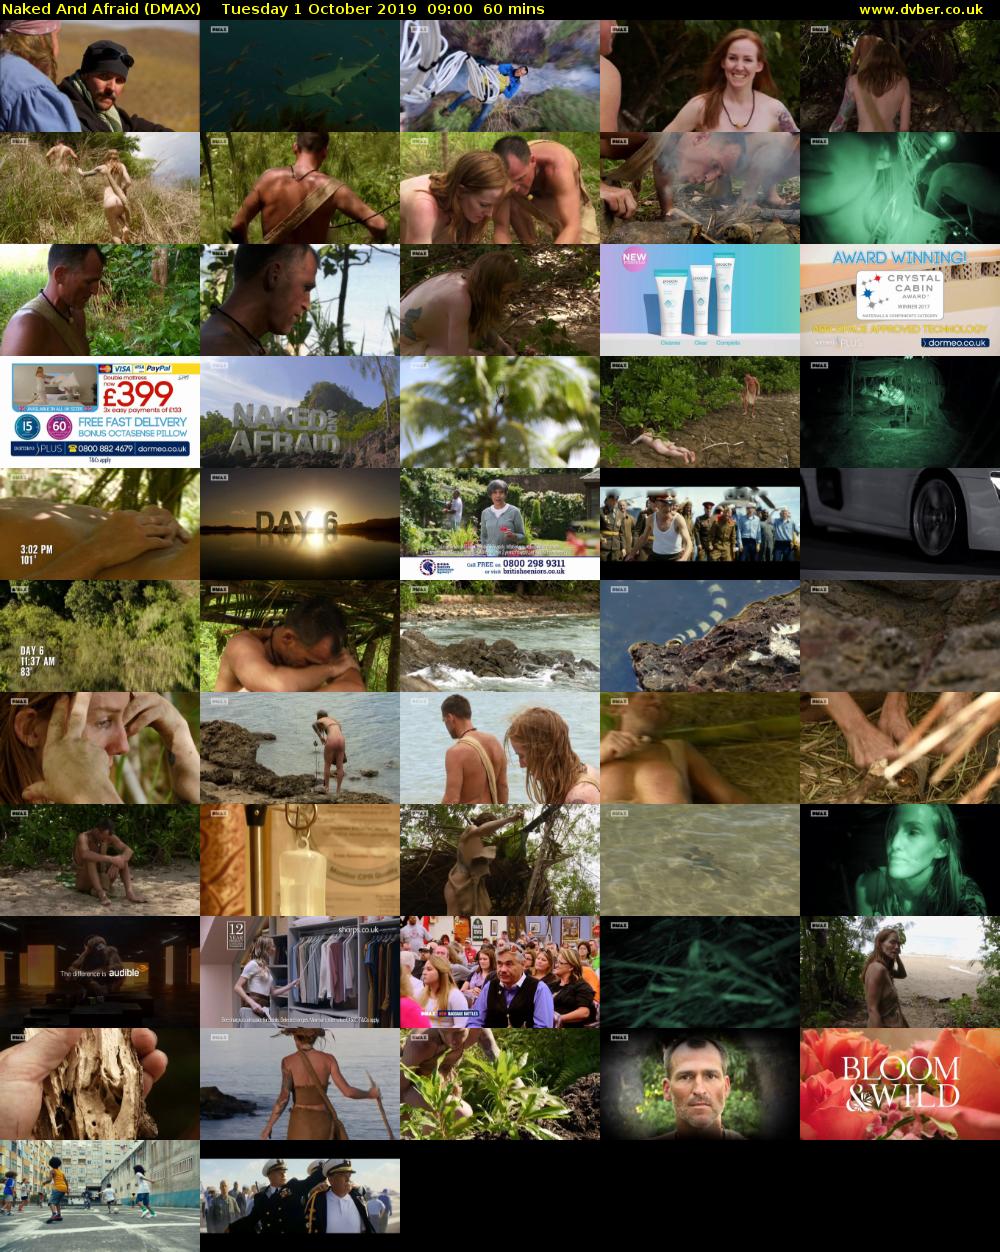 Naked And Afraid (DMAX) Tuesday 1 October 2019 09:00 - 10:00